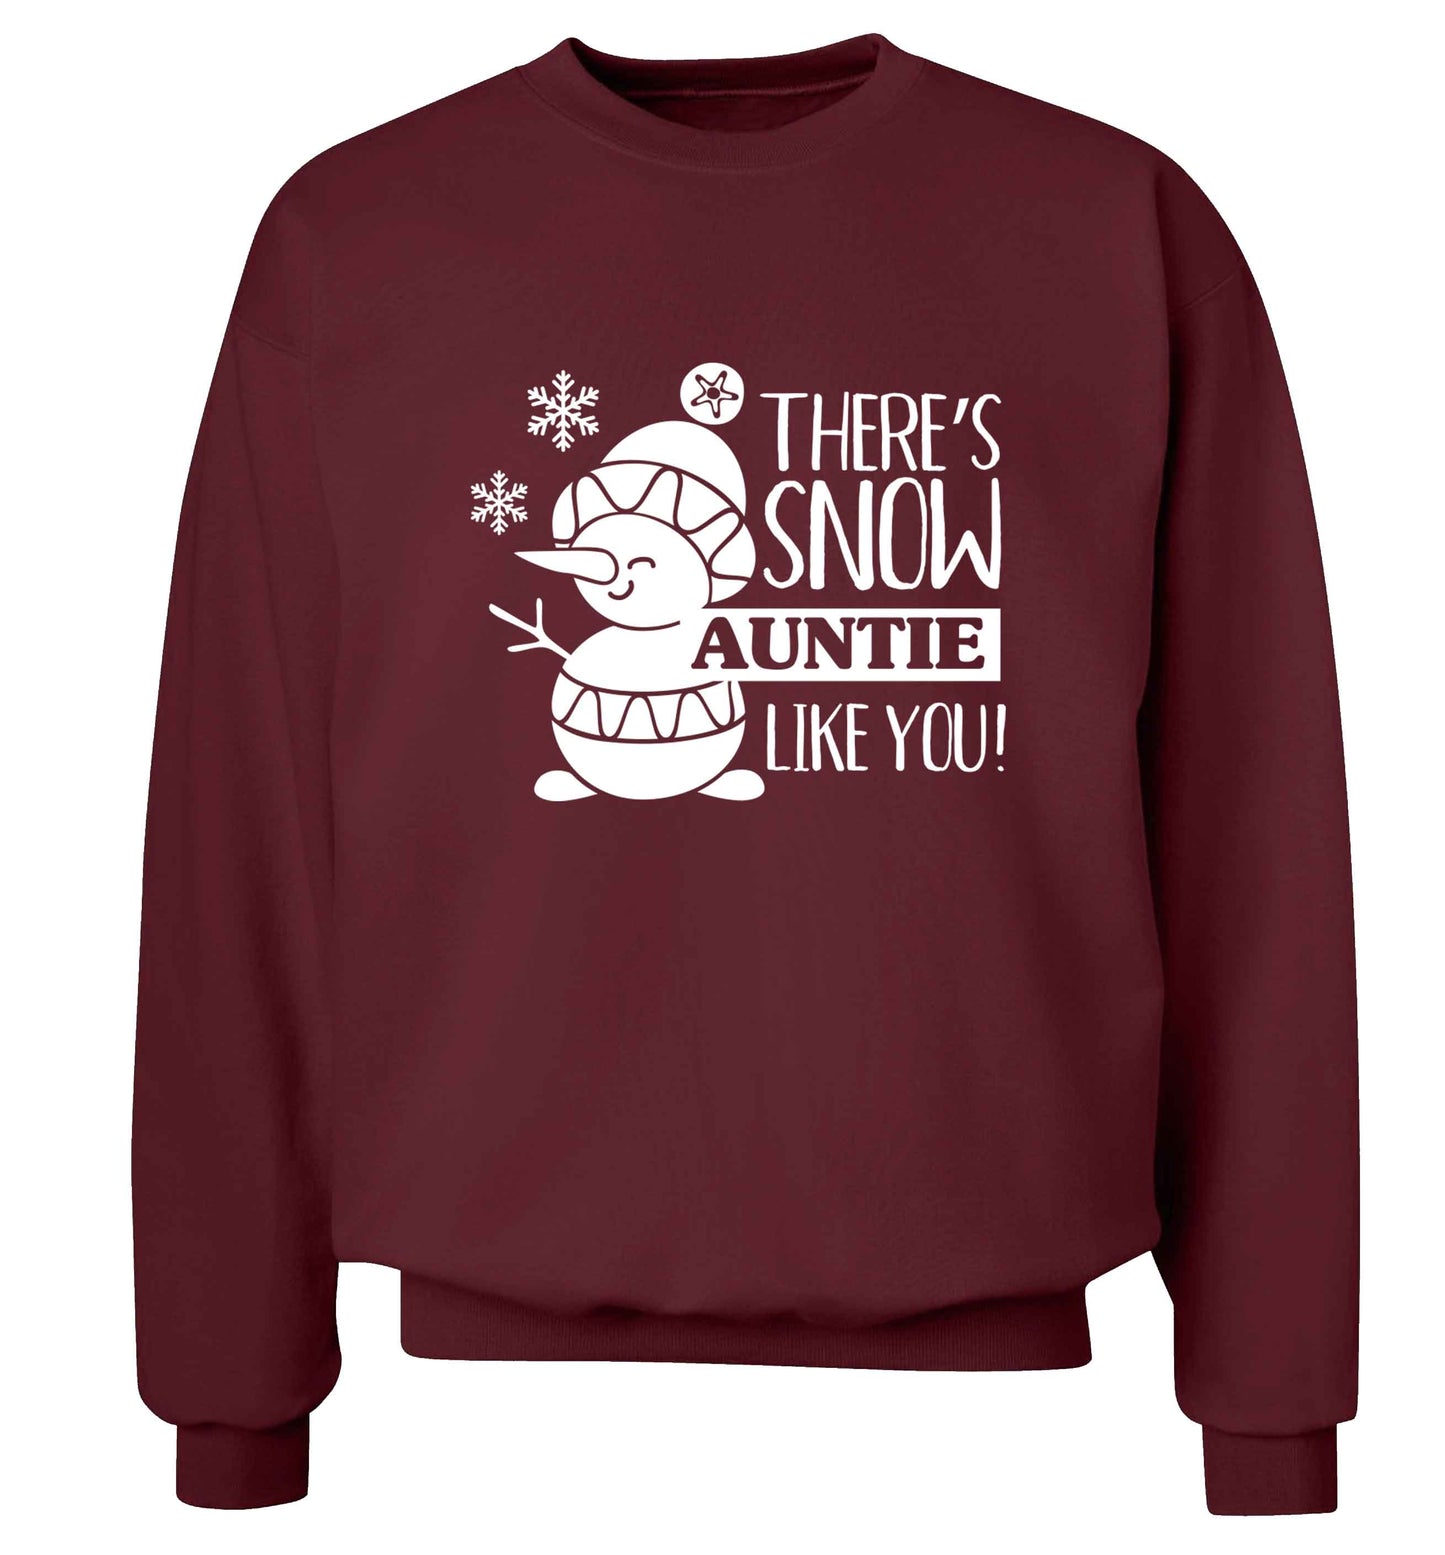 There's snow auntie like you adult's unisex maroon sweater 2XL